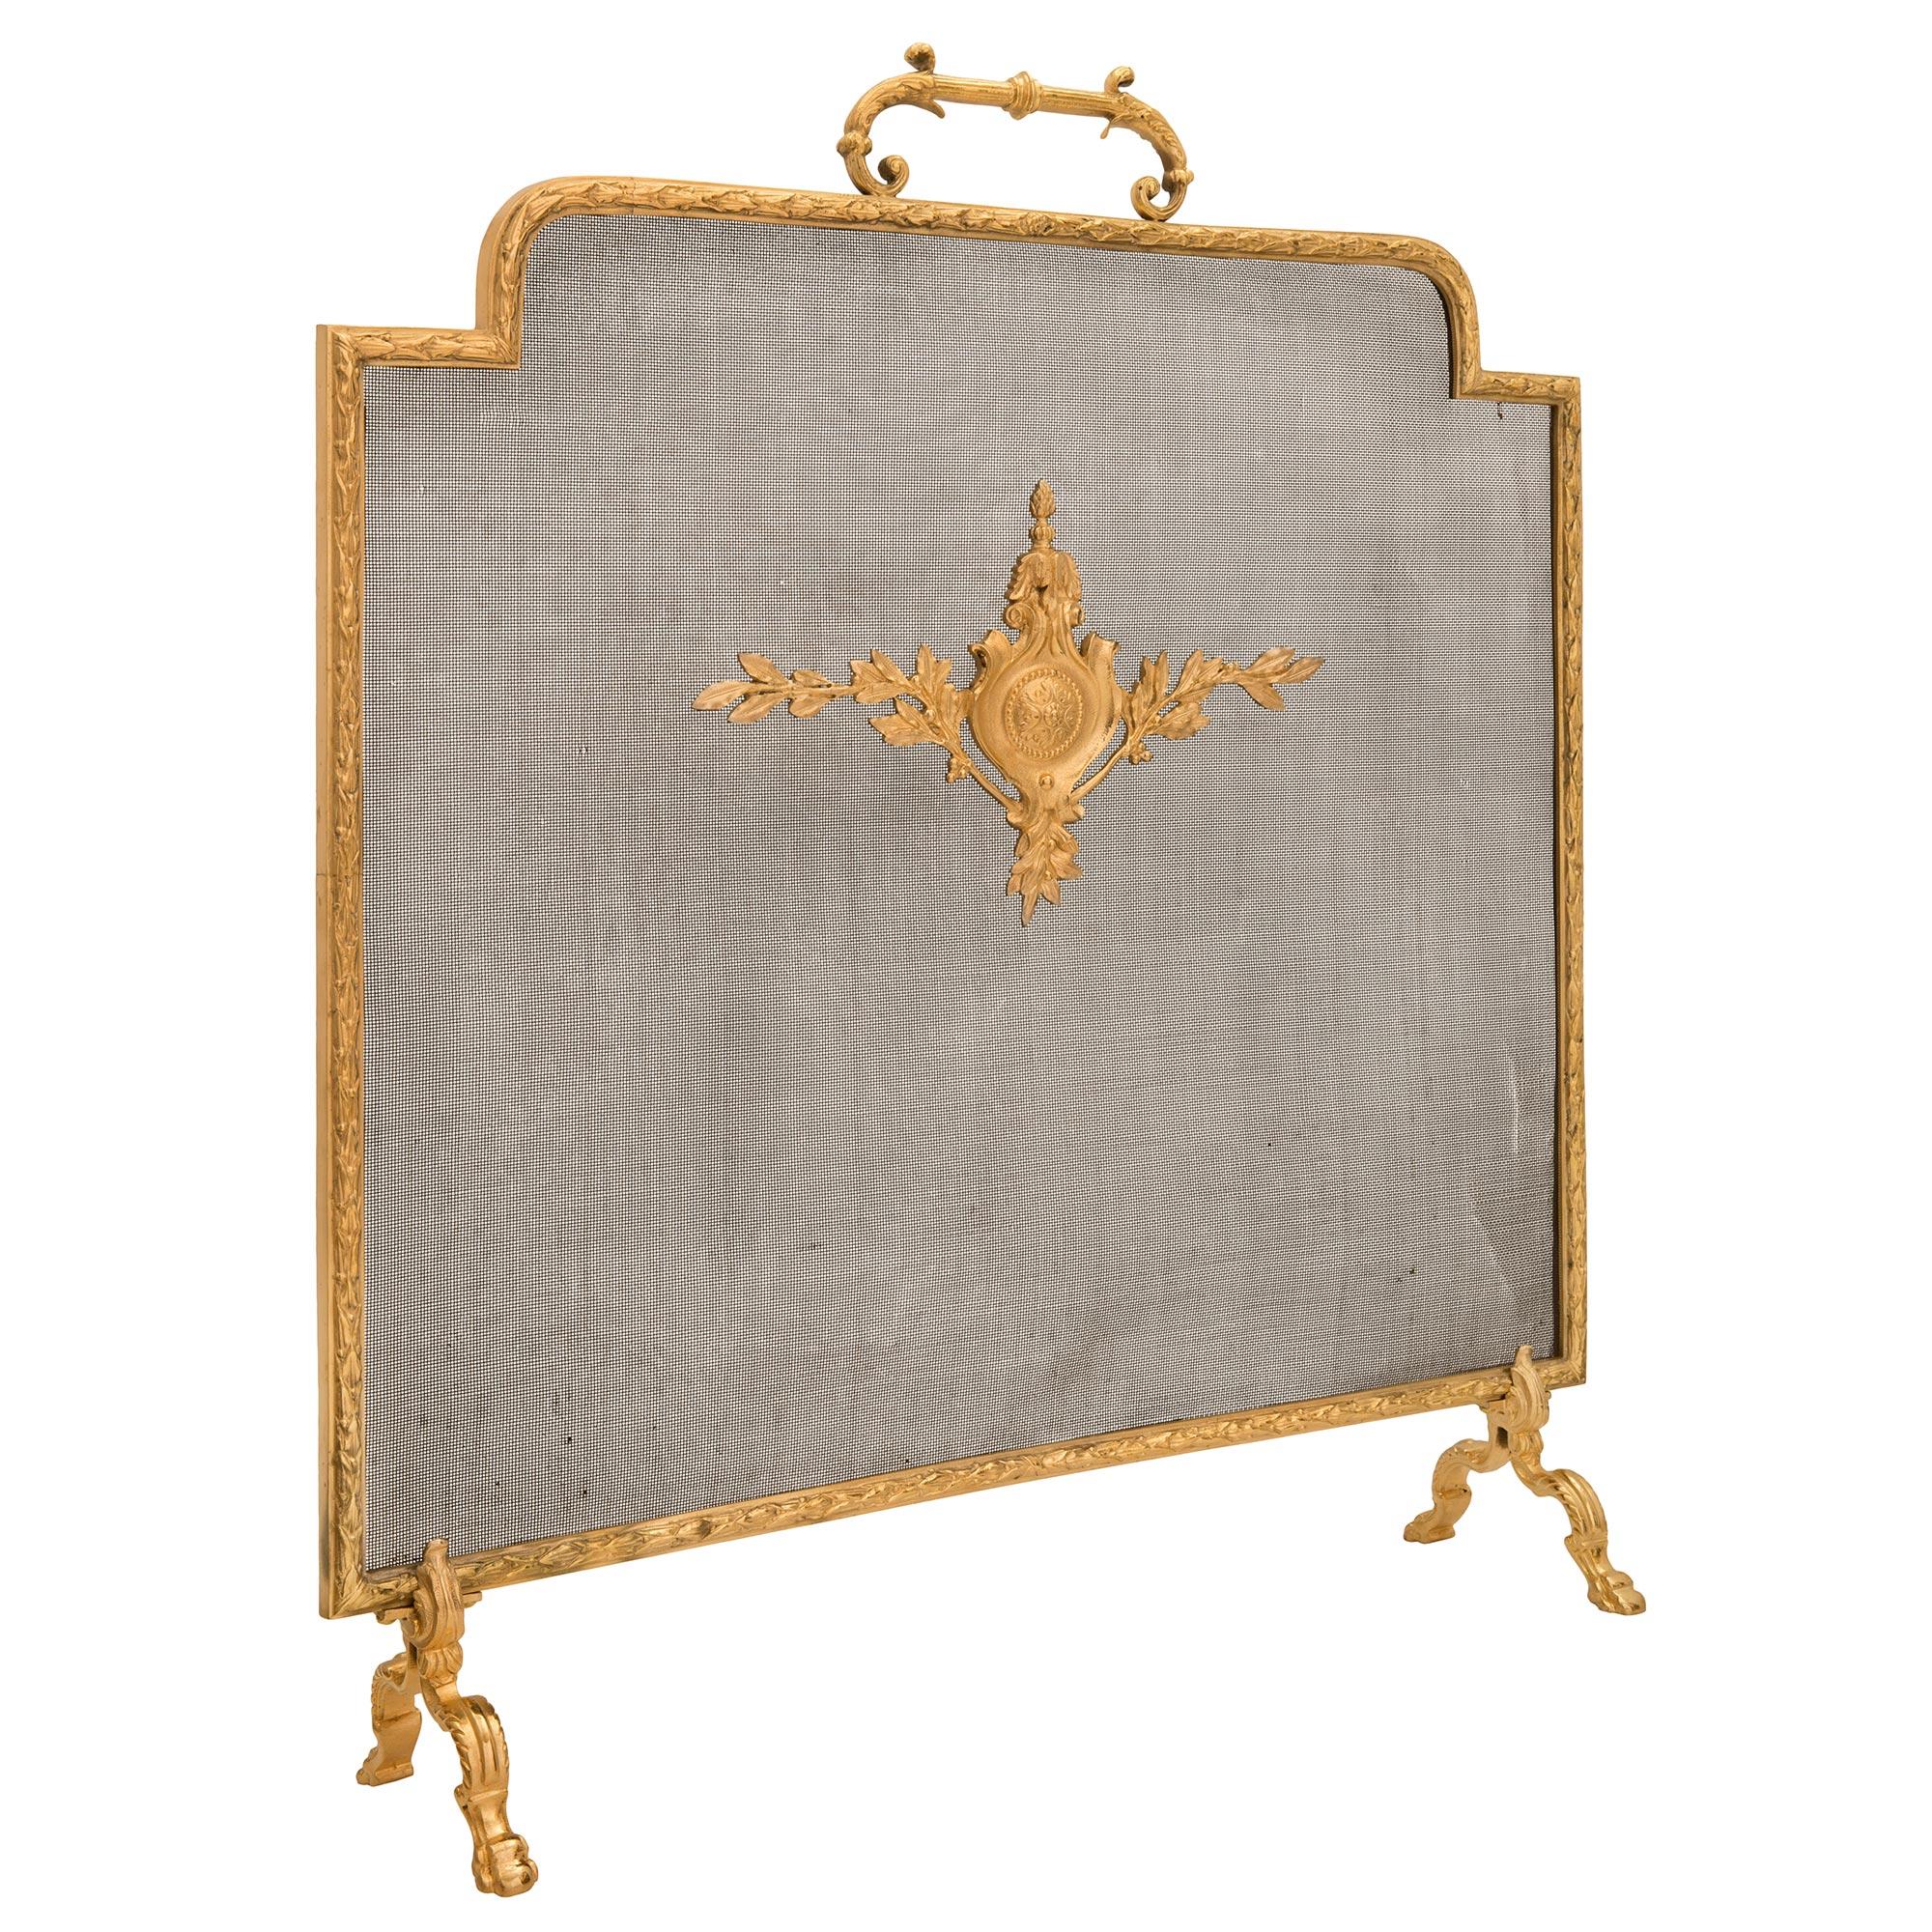 A beautiful and high quality French 19th century Louis XVI st. ormolu fireplace screen. The screen is raised by four elegant scrolled feet with richly chased large acanthus leaves. The original central mesh is centered by a striking and finely